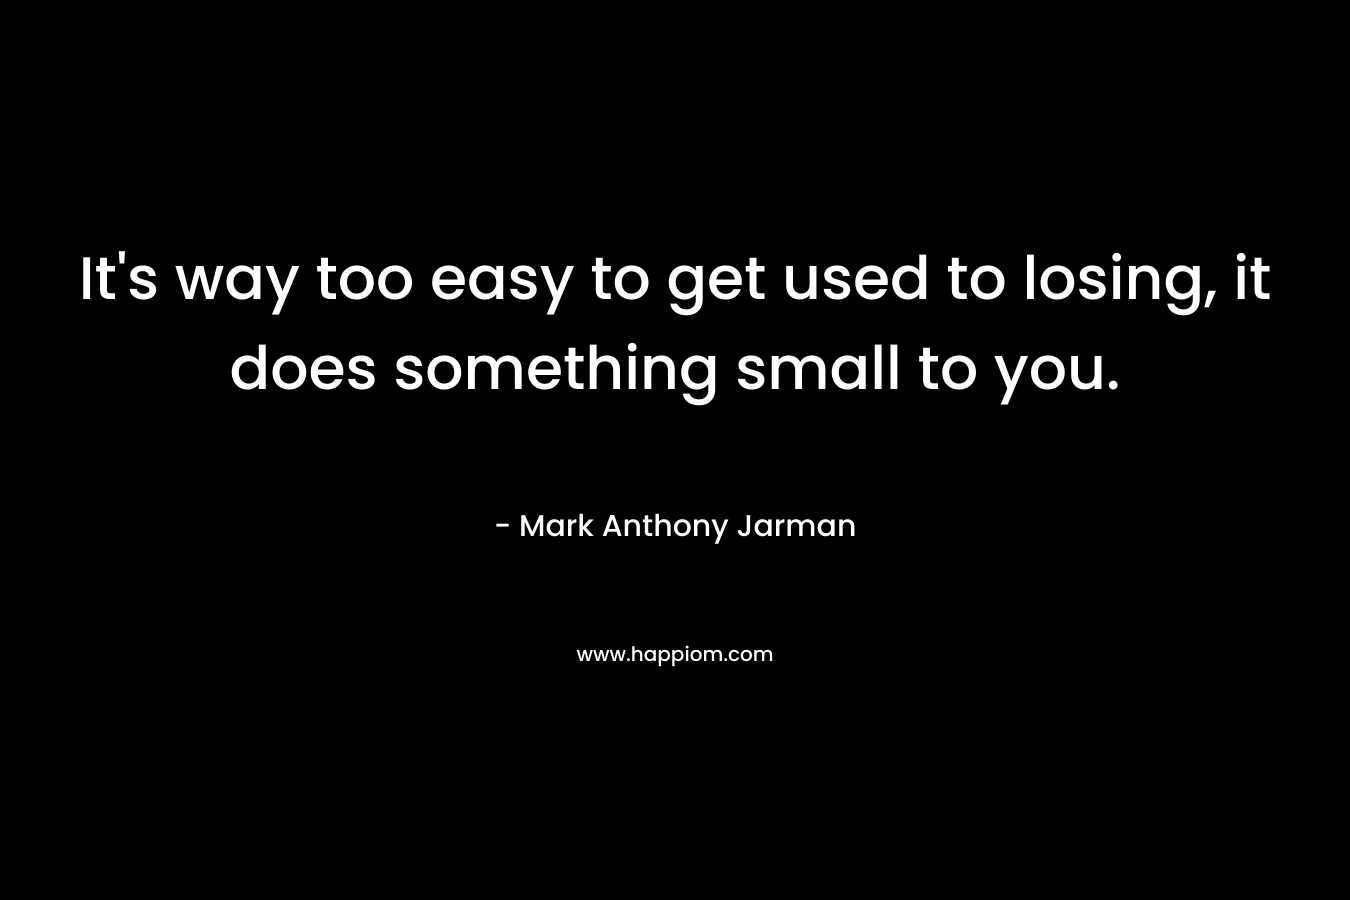 It’s way too easy to get used to losing, it does something small to you. – Mark Anthony Jarman